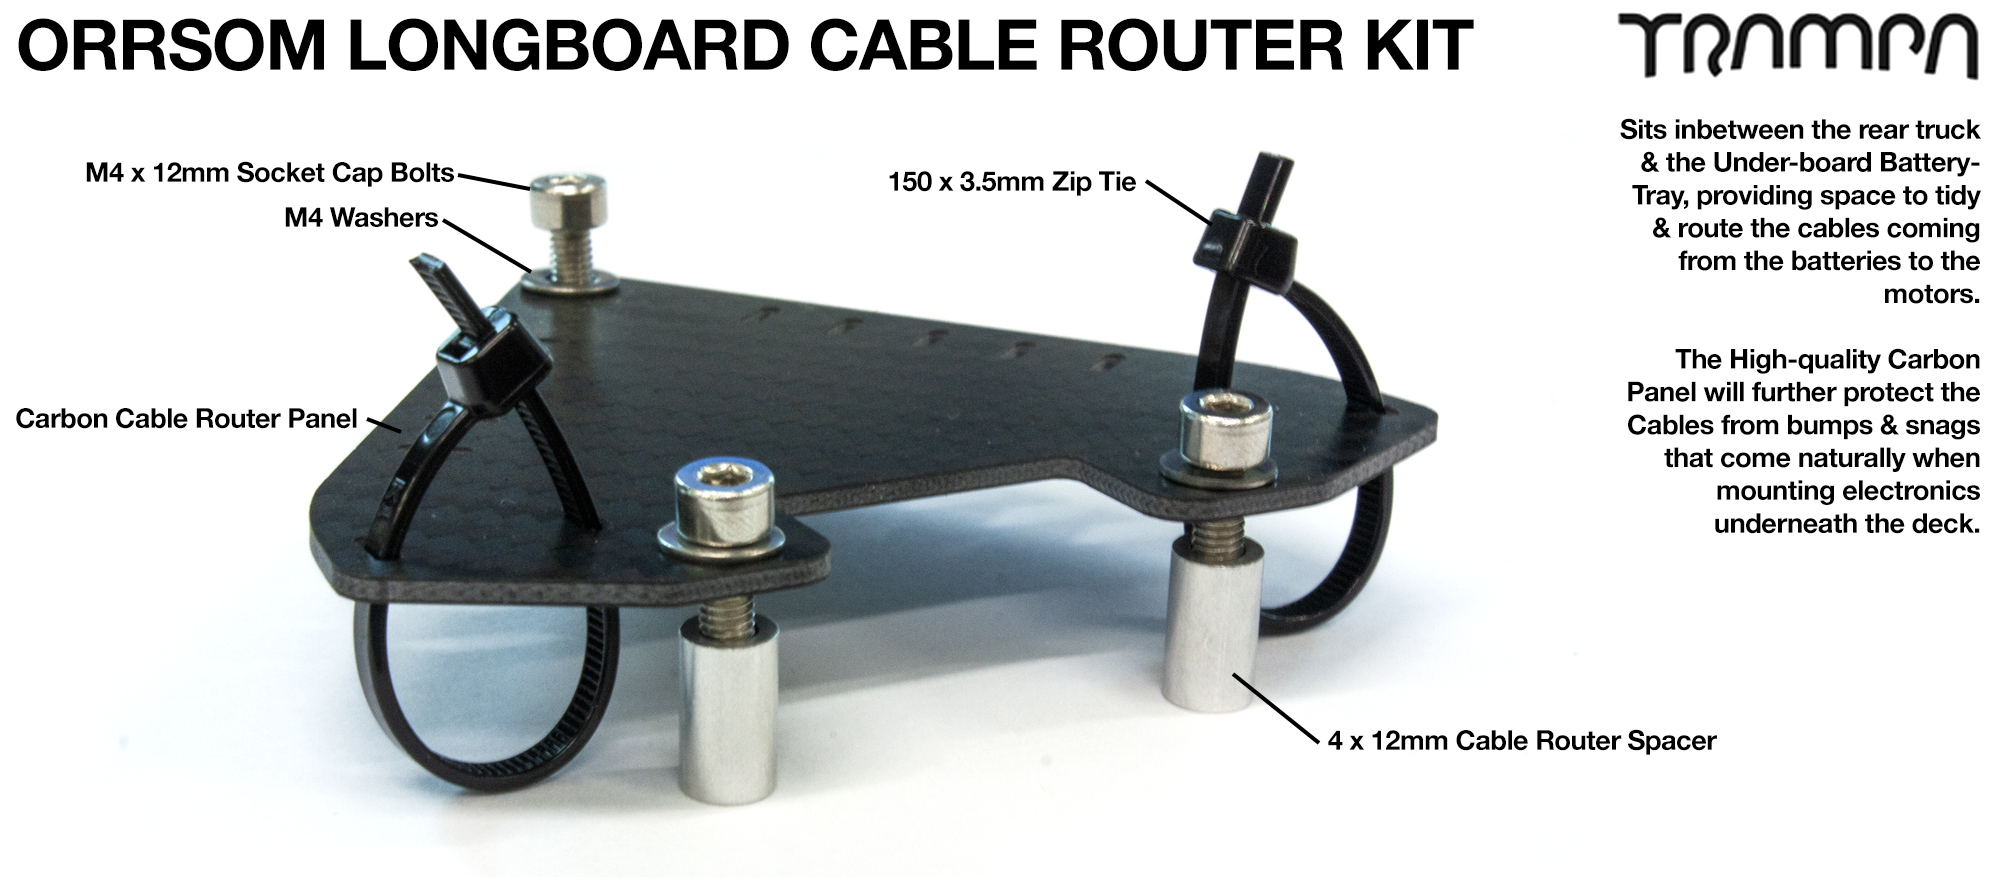 Orrsom Longboard Cable Routing Kit